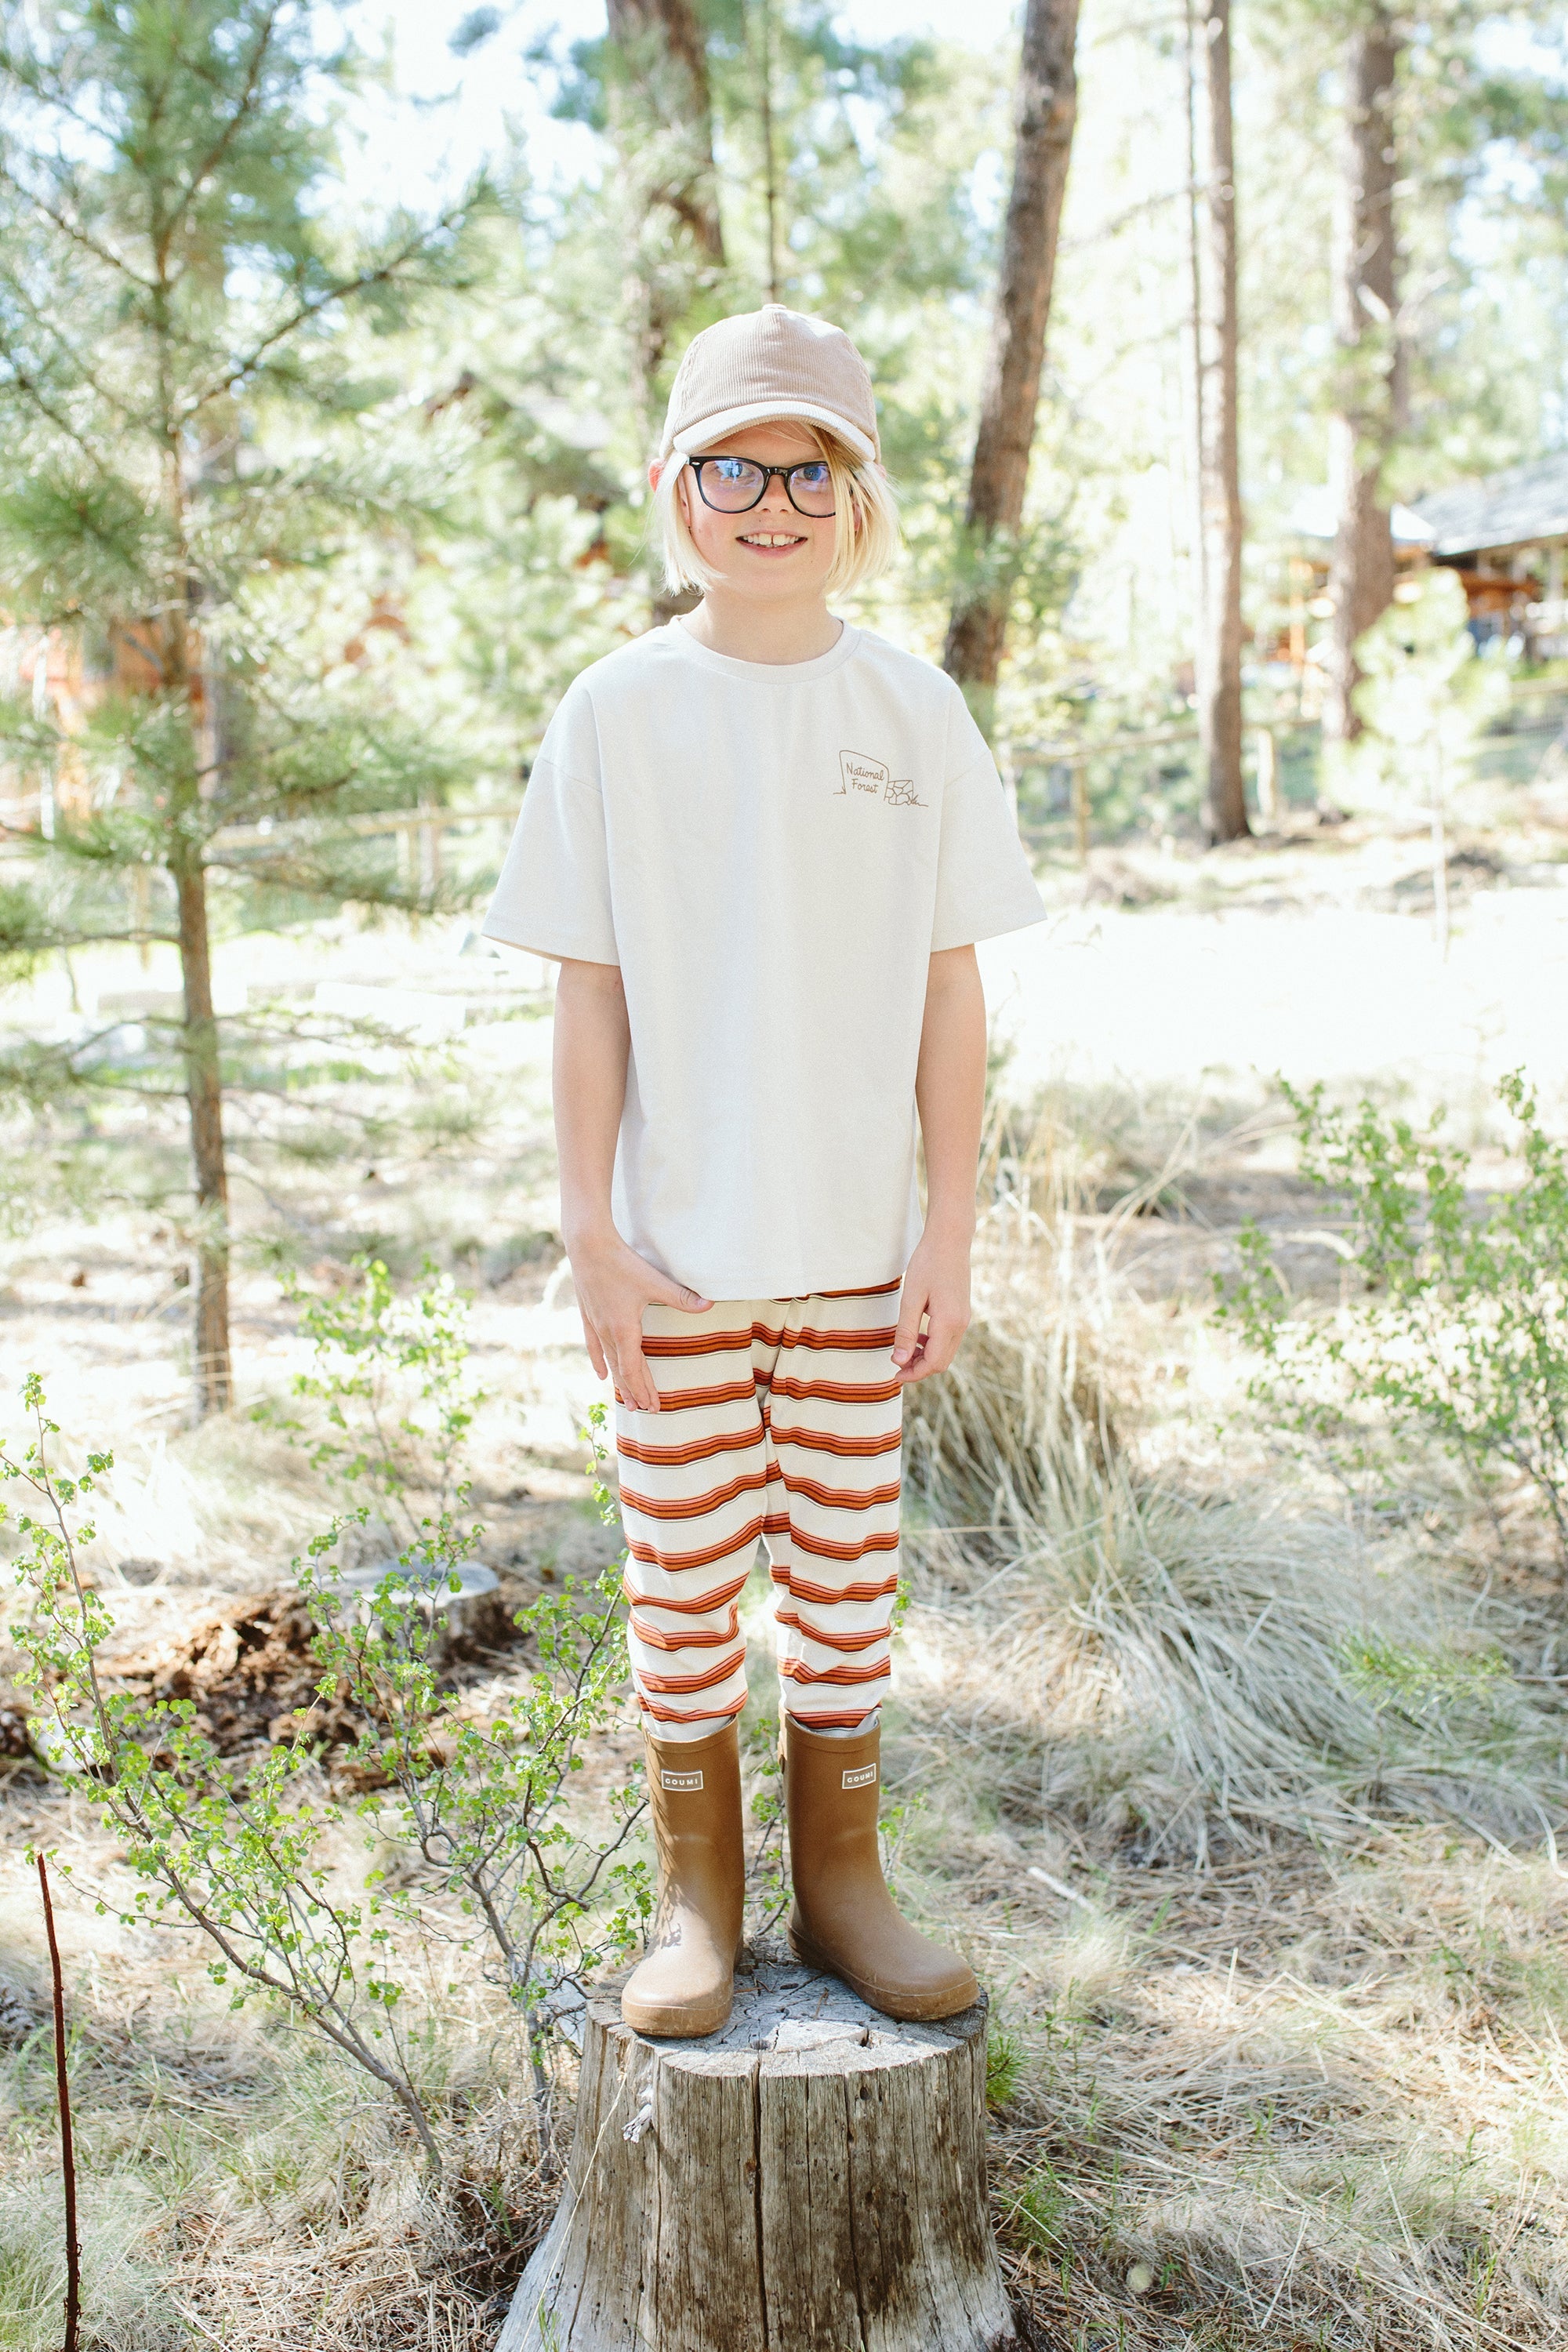 BIG KID OVERSIZED TEE | NATIONAL FOREST